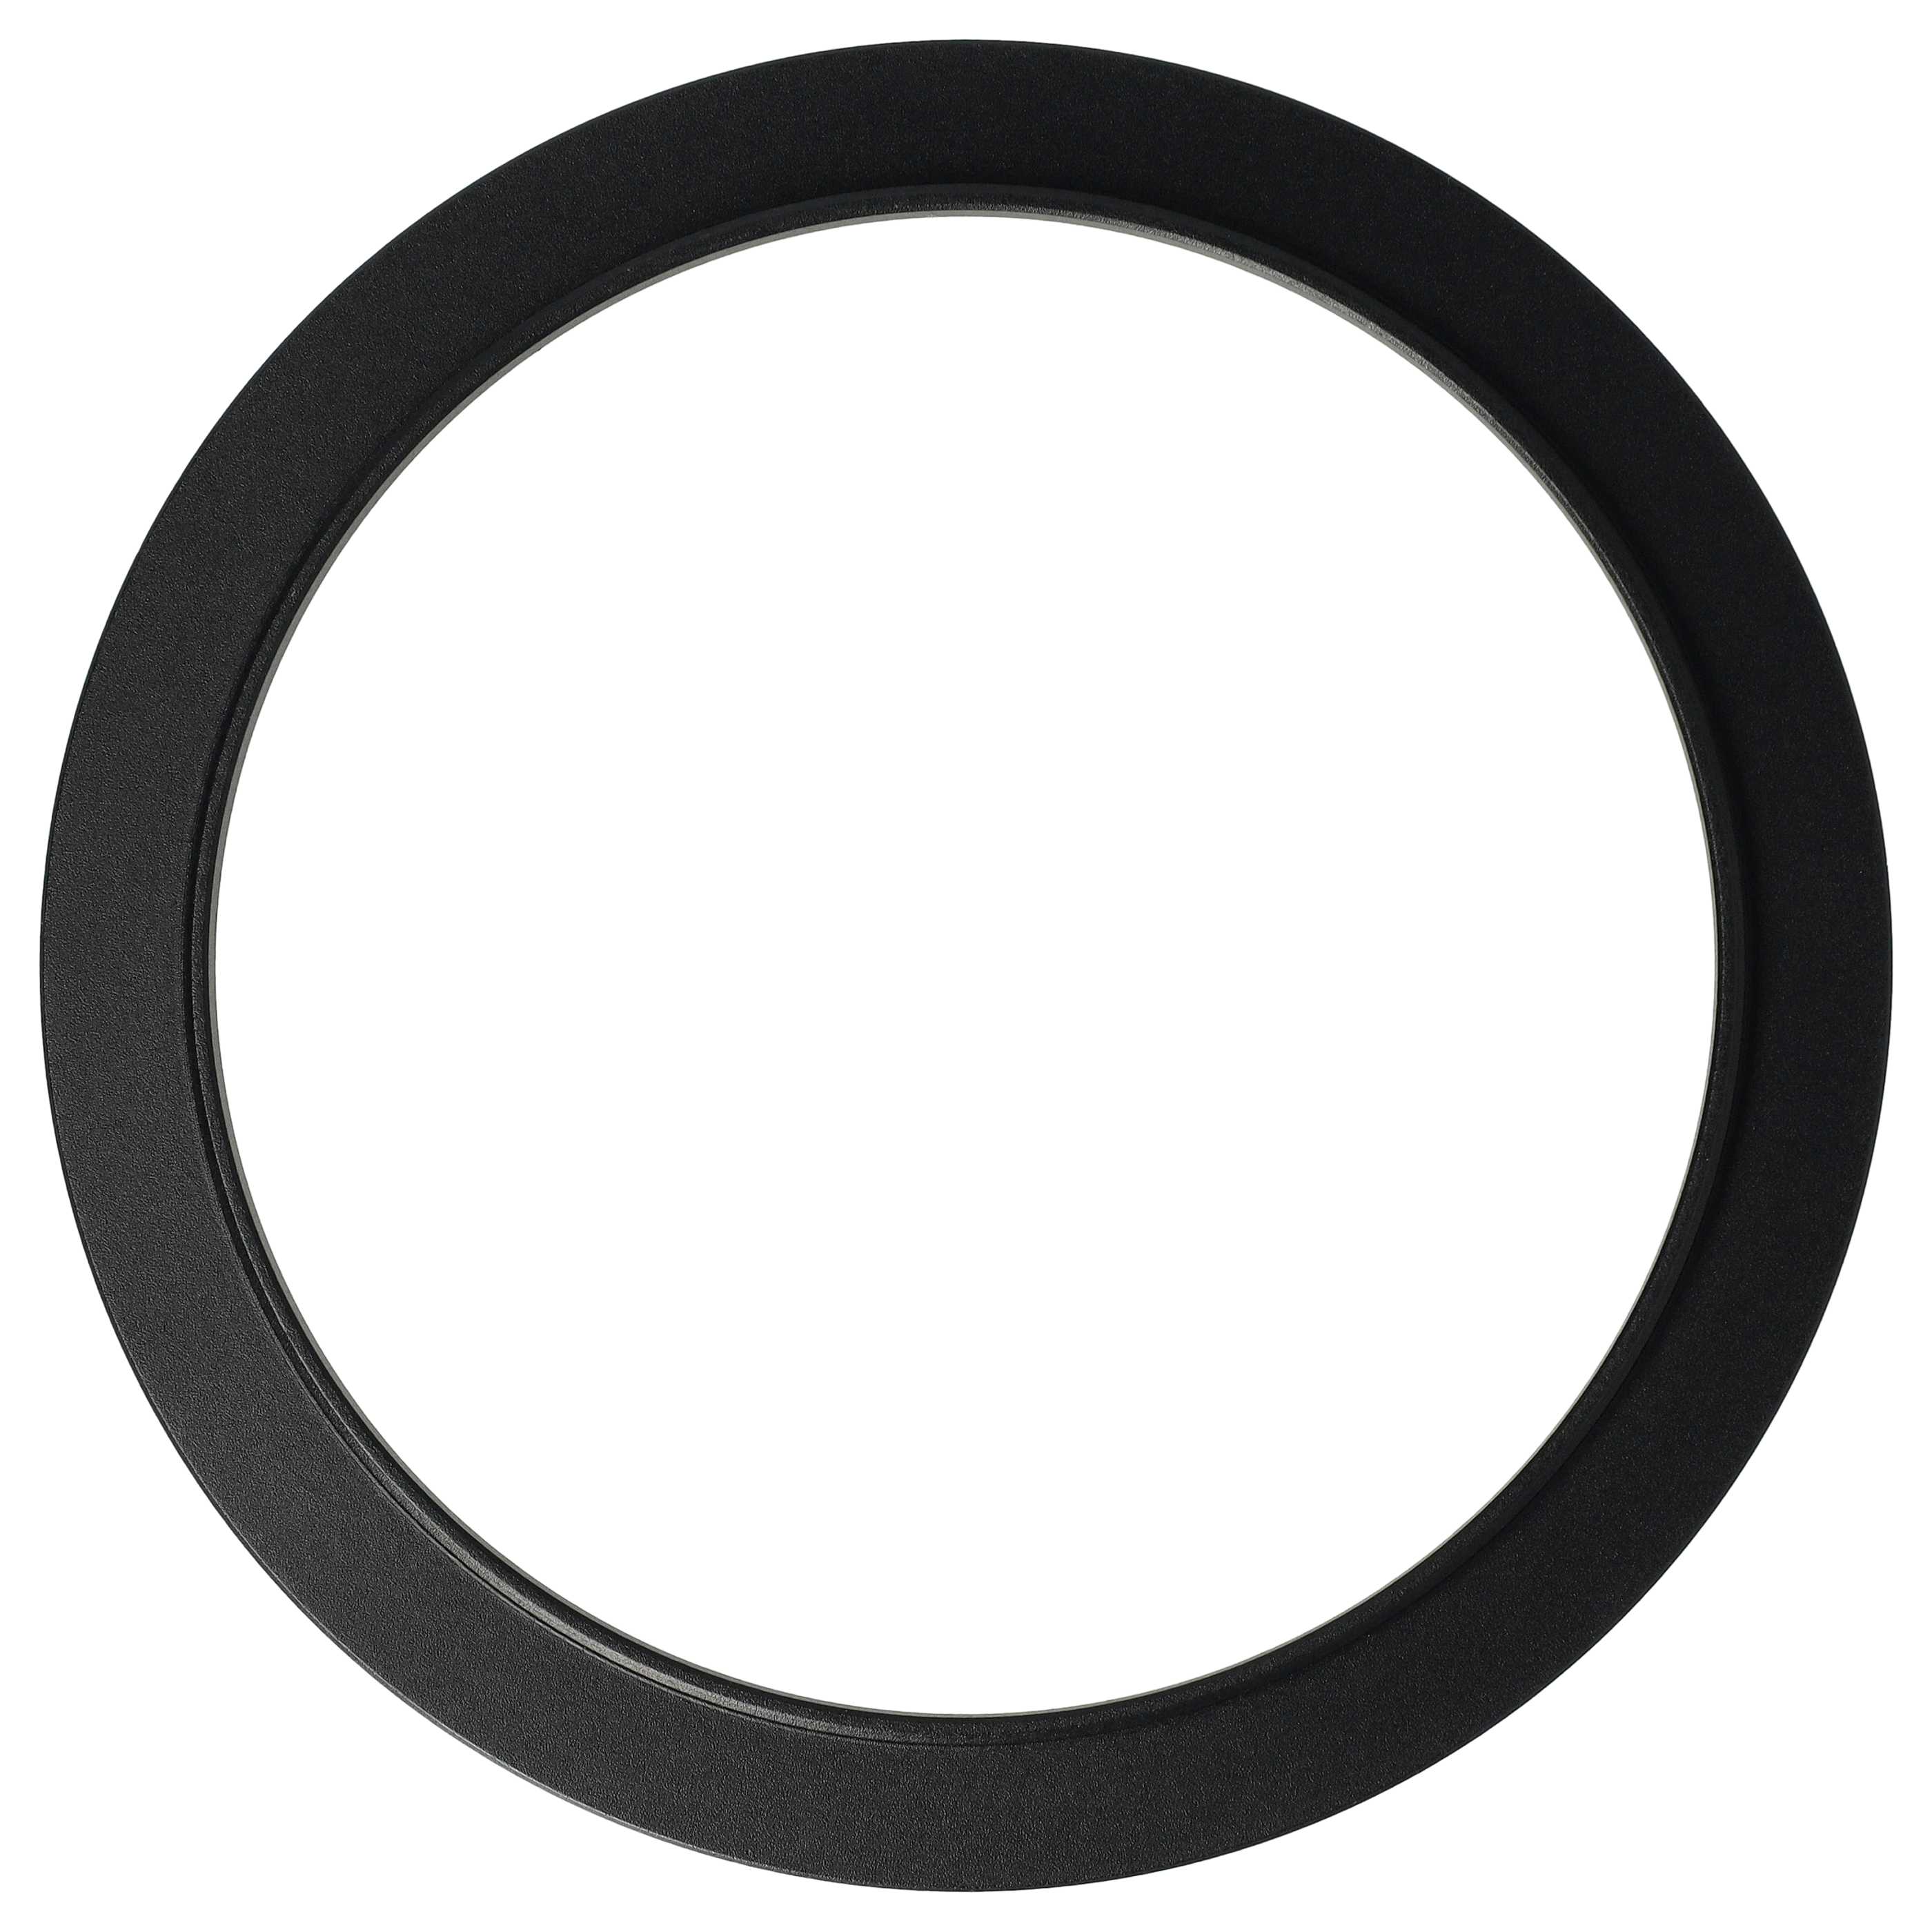 Step-Up Ring Adapter of 82 mm to 95 mmfor various Camera Lens - Filter Adapter